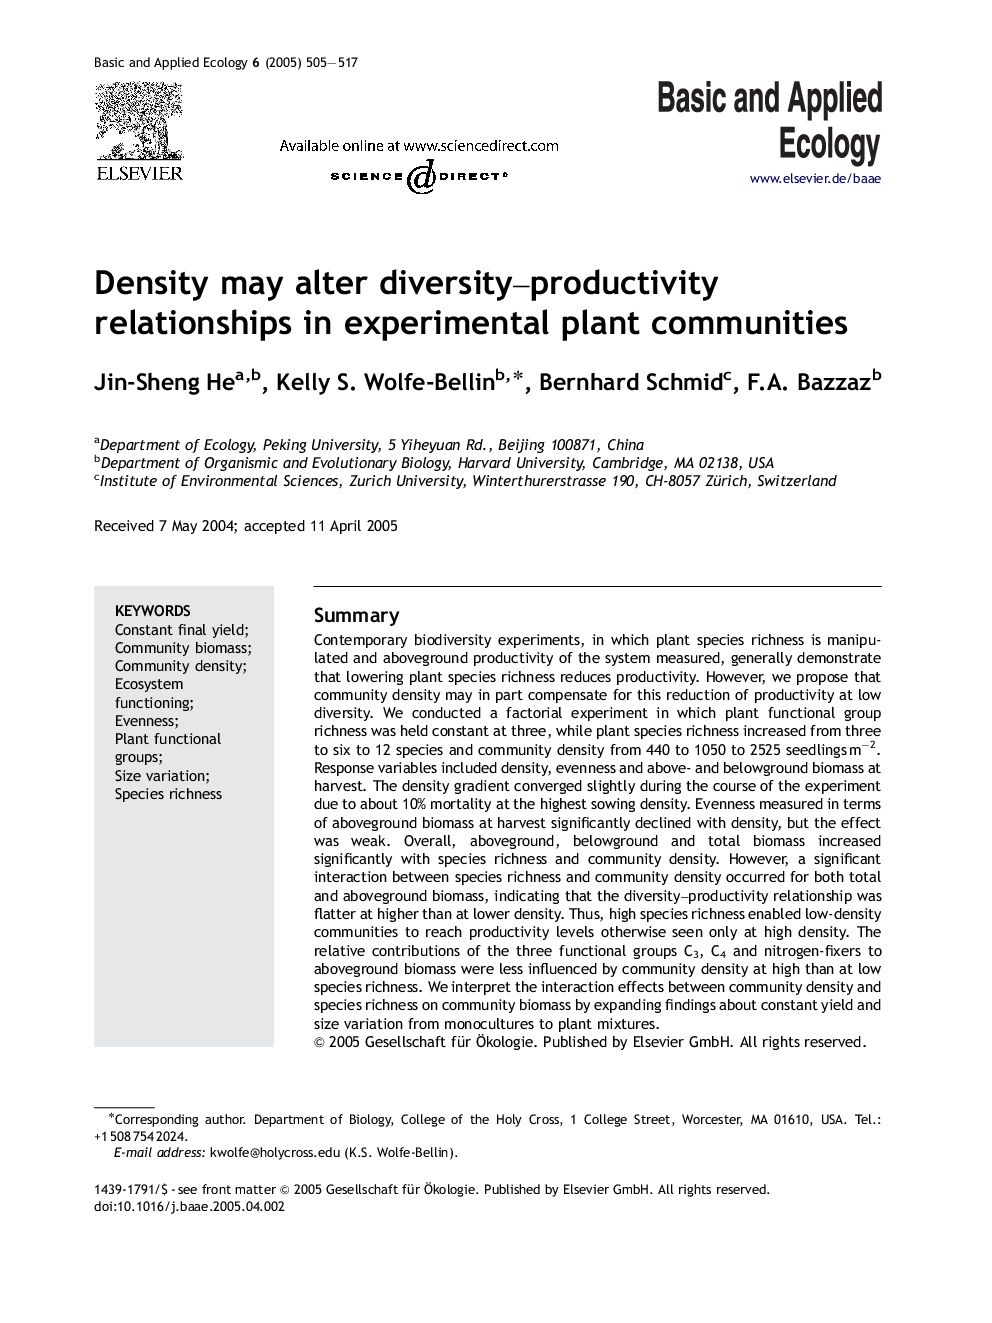 Density may alter diversity-productivity relationships in experimental plant communities